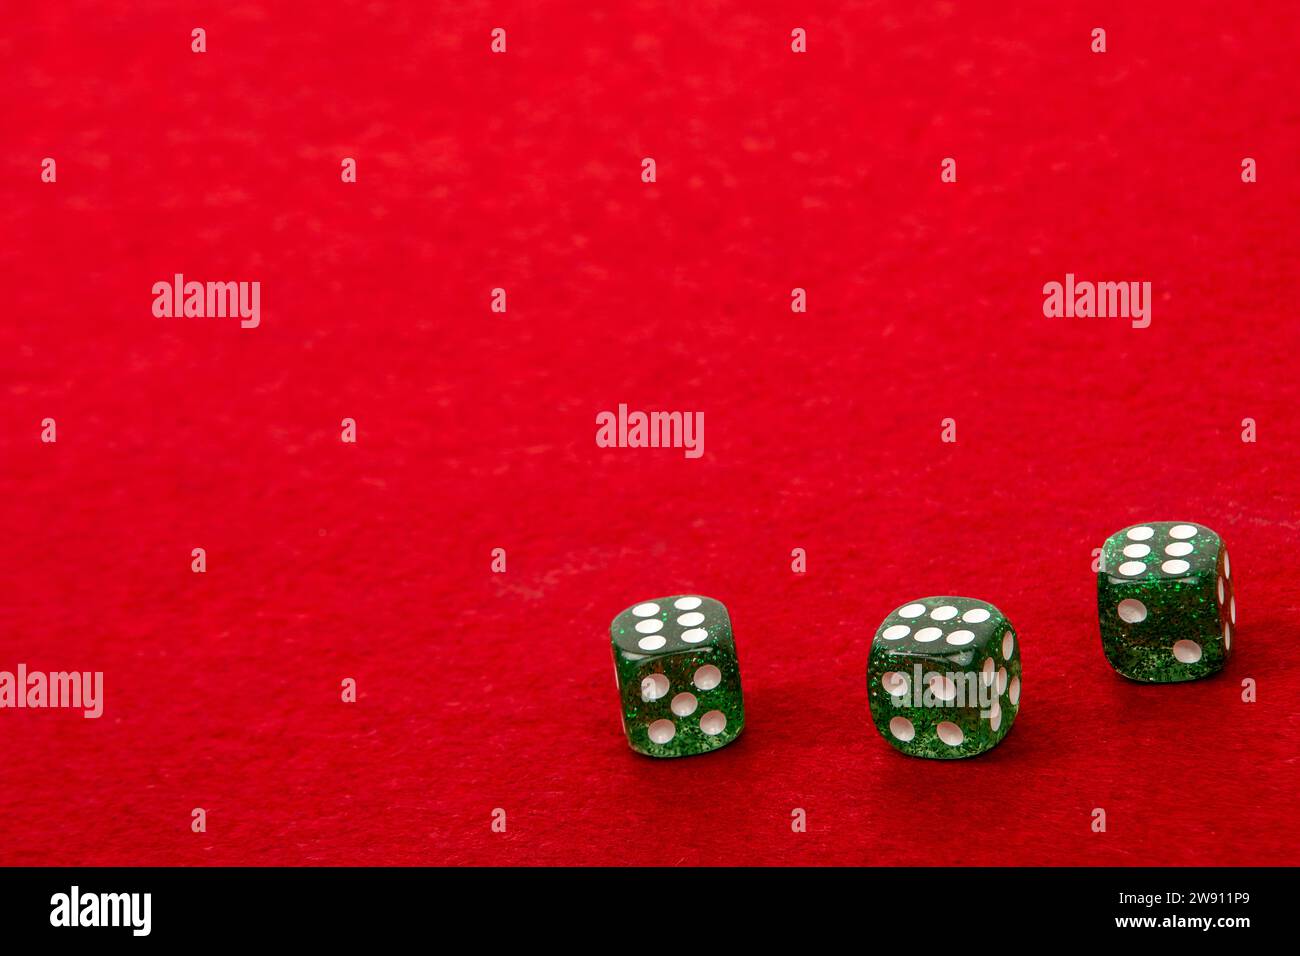 Three Dice with Value 6 on Red Velvet Playing Table - Gambling and Game Concept for Luck and Chance Games Stock Photo